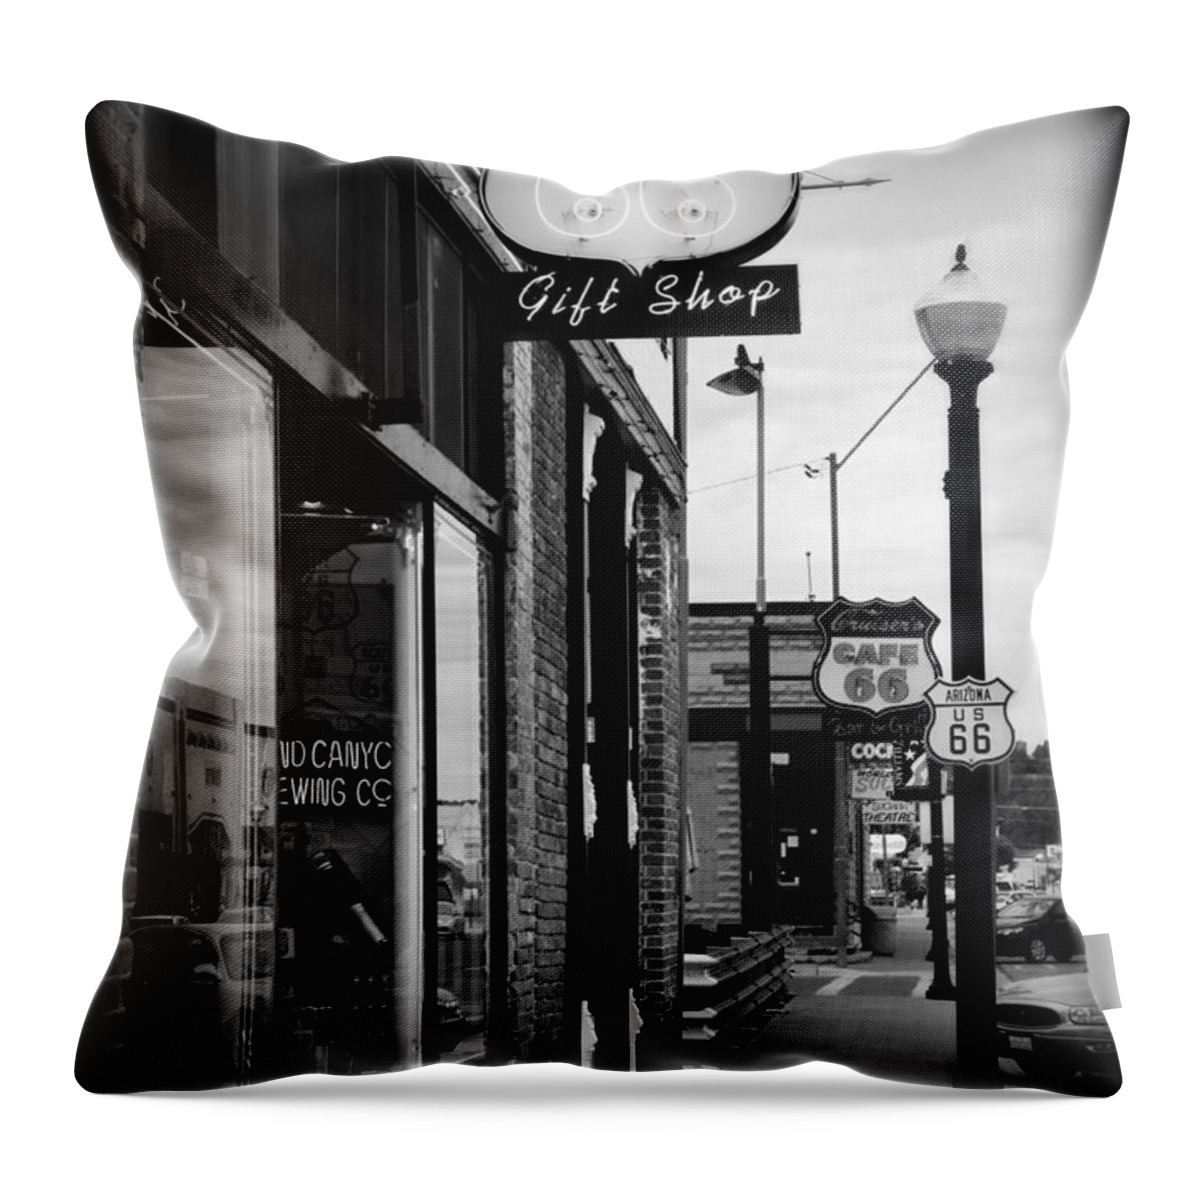 Williams Throw Pillow featuring the photograph Small Town Shops by Ricky Barnard